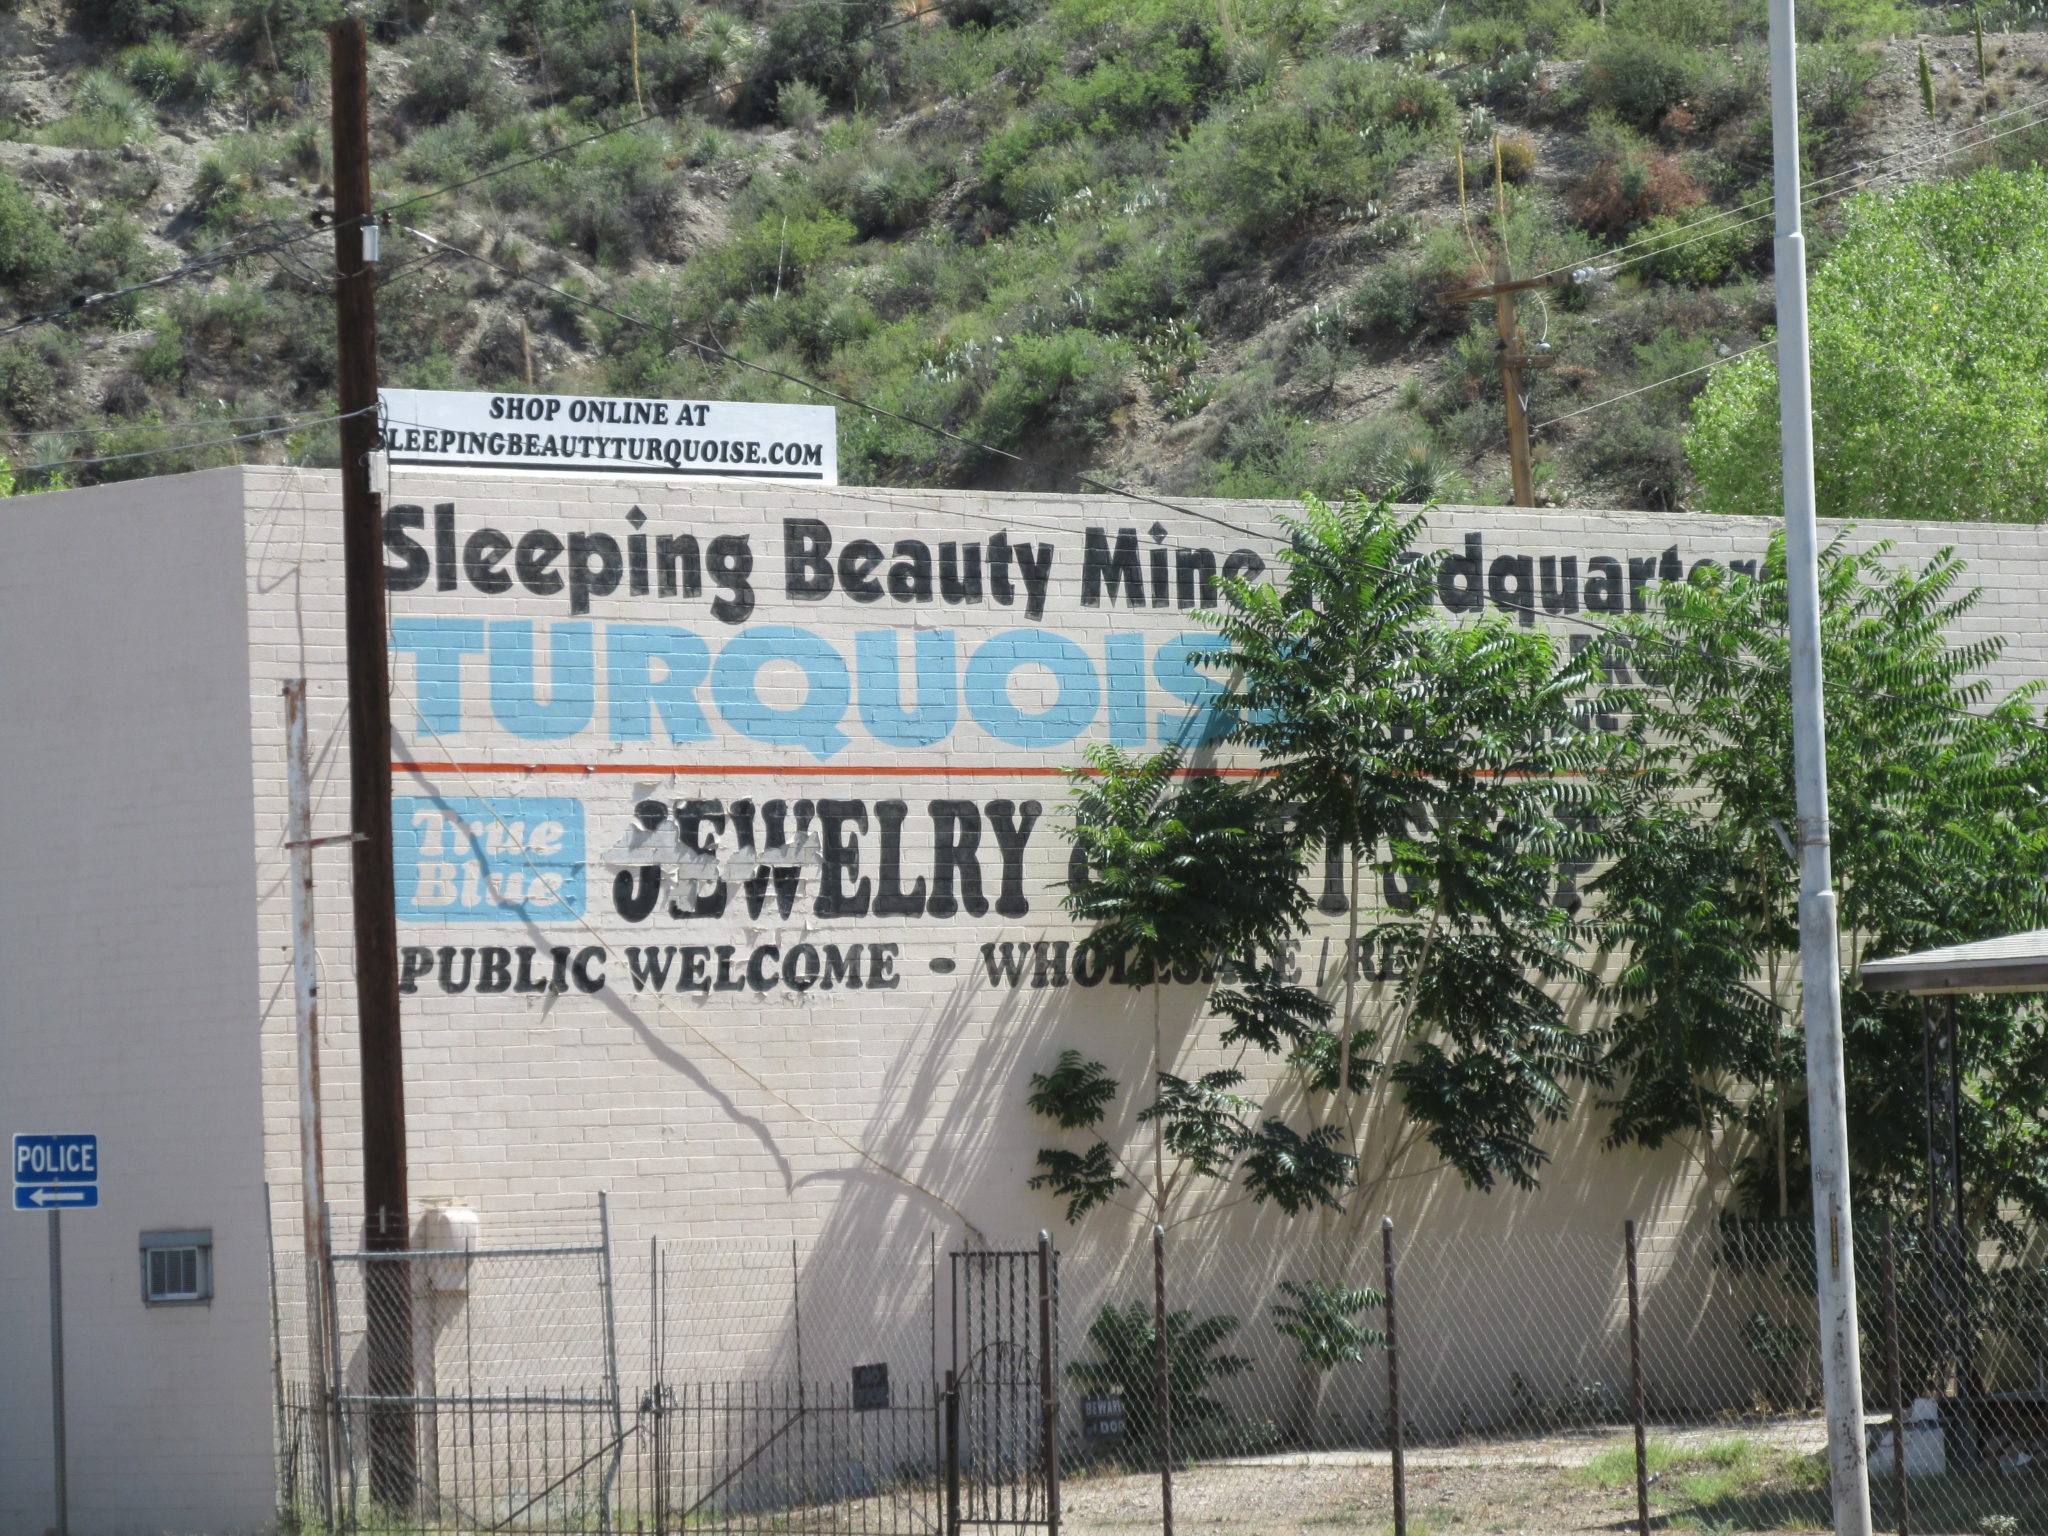 Sleeping Beauty Turquoise Outlet - now closed